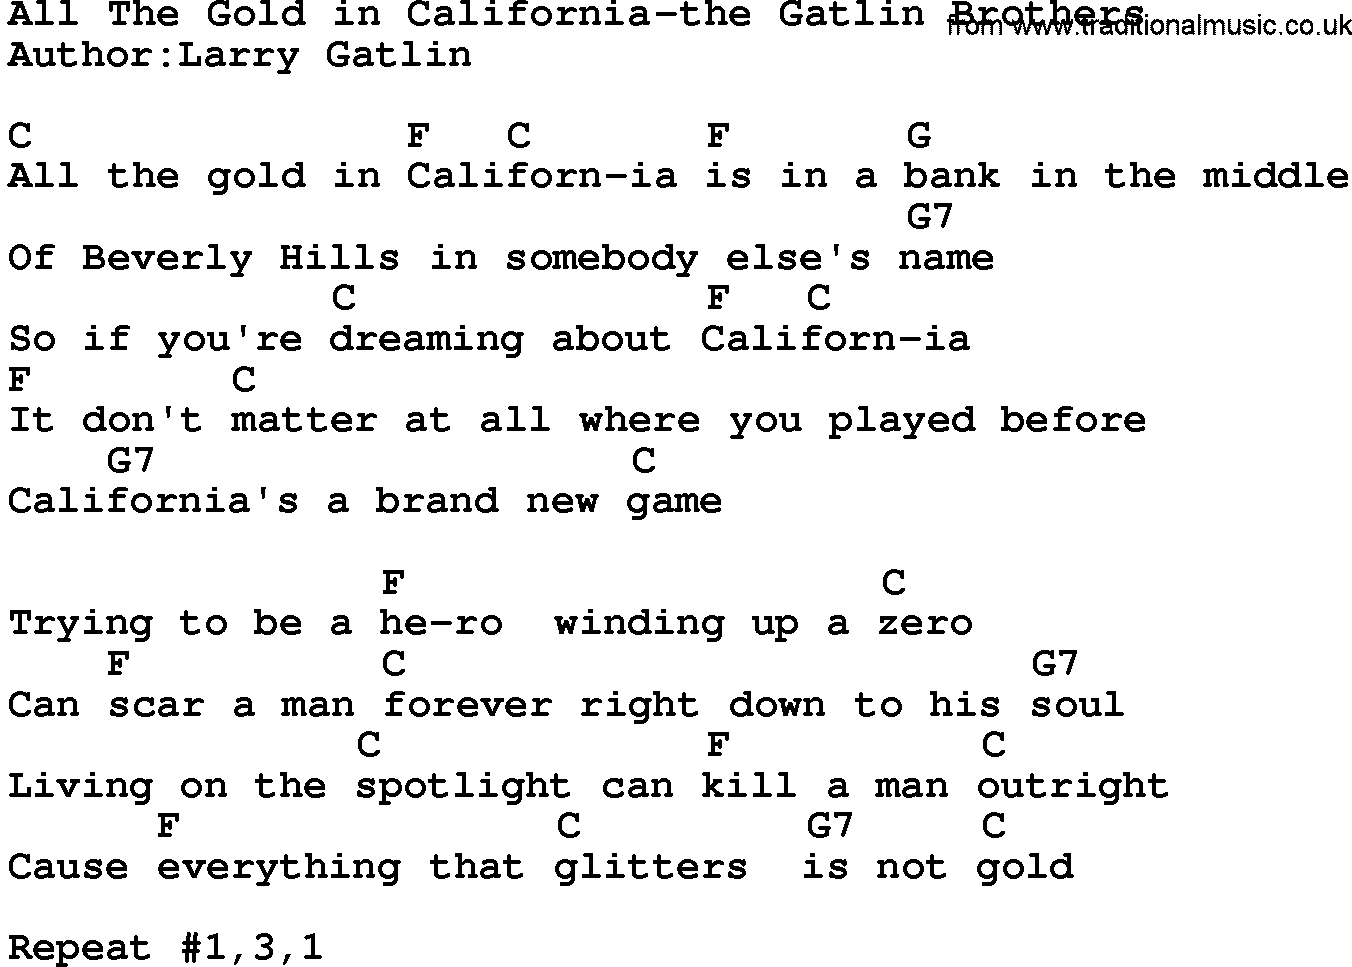 Country music song: All The Gold In California-The Gatlin Brothers lyrics and chords